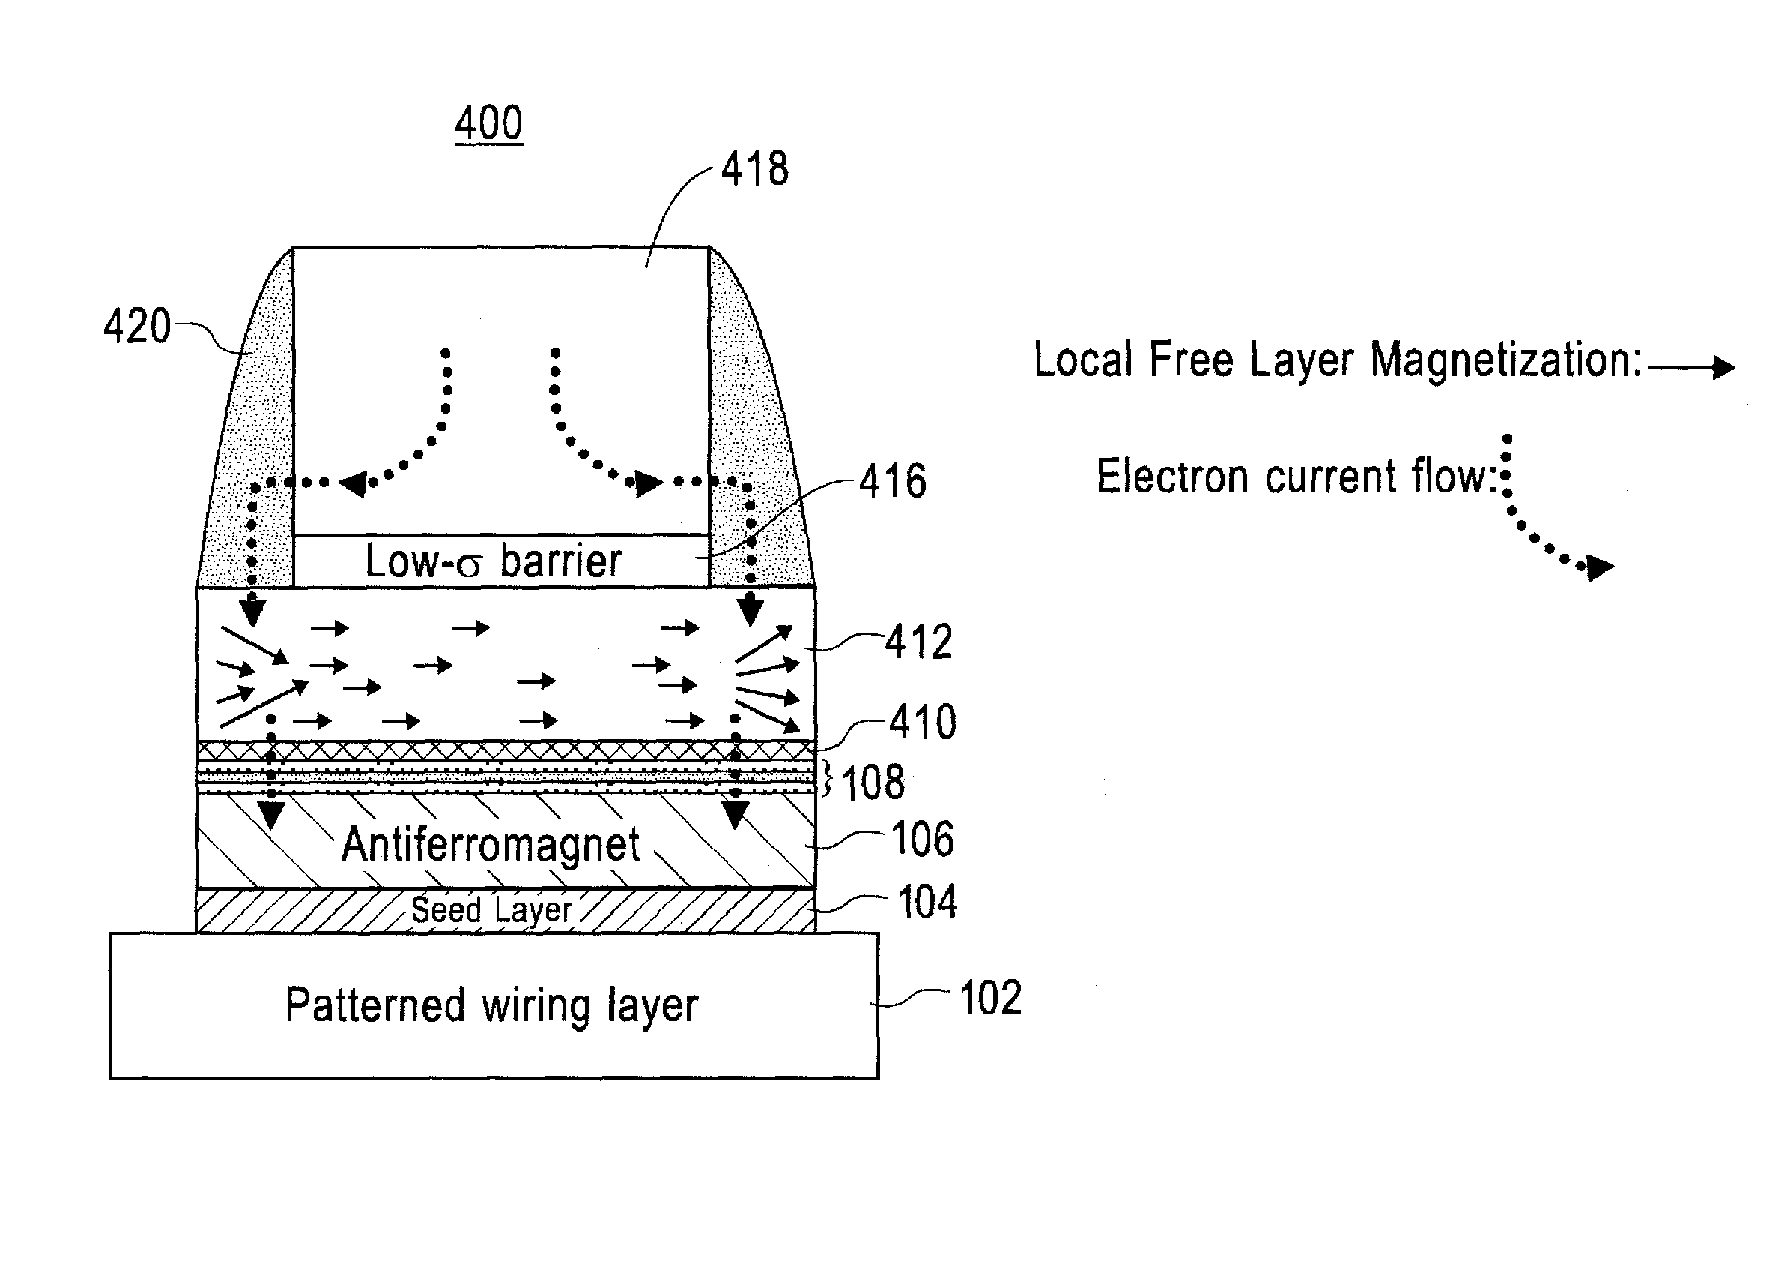 Sidewall coating for non-uniform spin momentum-transfer magnetic tunnel junction current flow